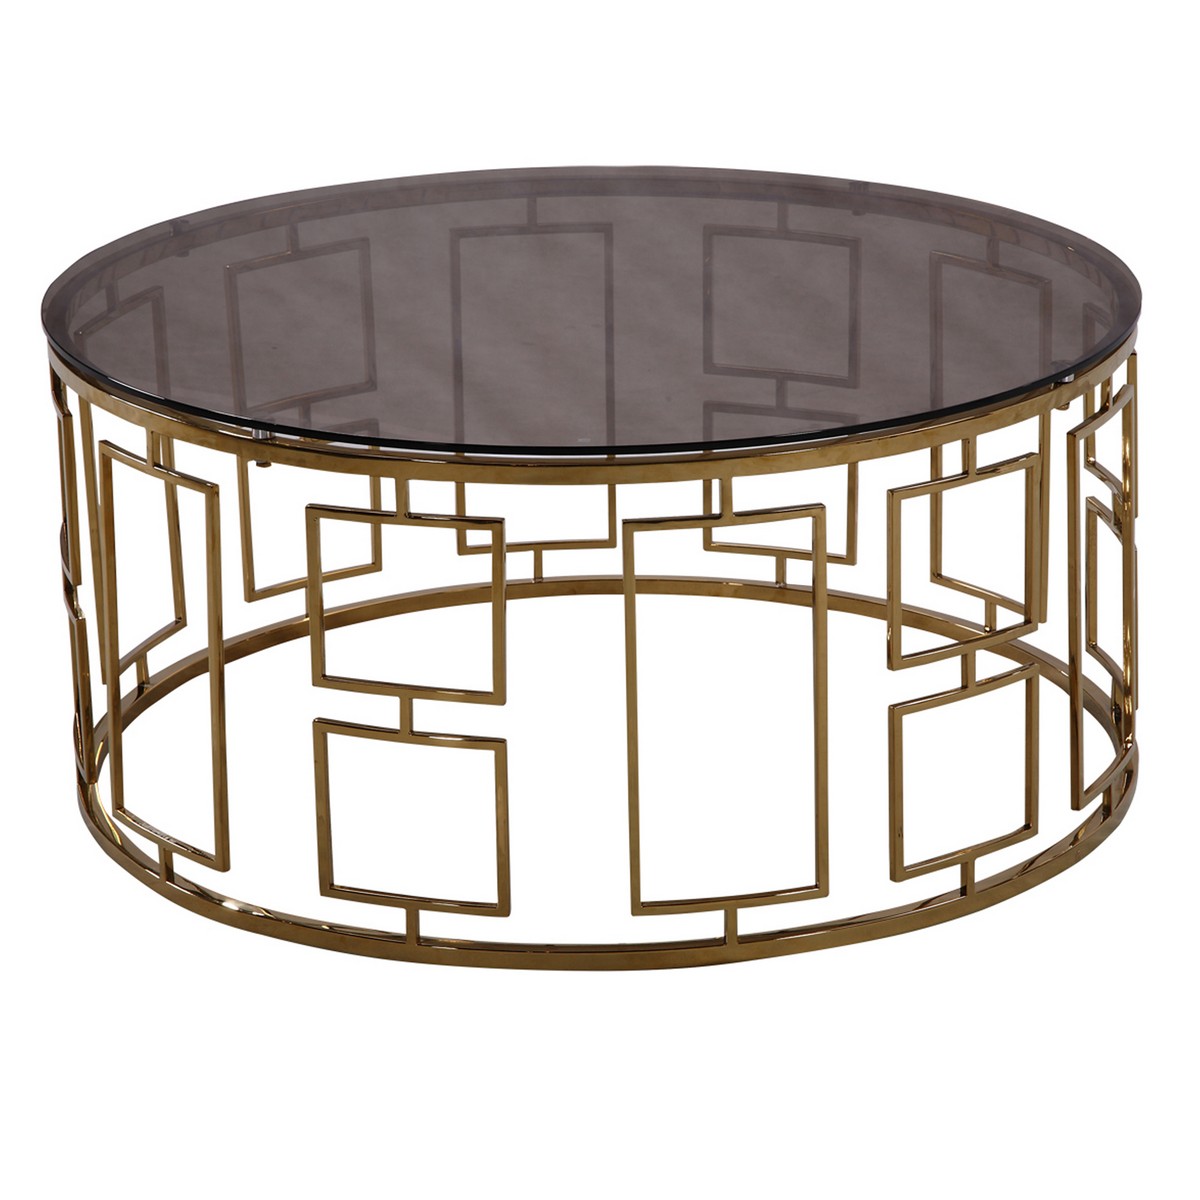 Armen Living Zinc Contemporary Coffee Table In Shiny Gold With Smoked Glass